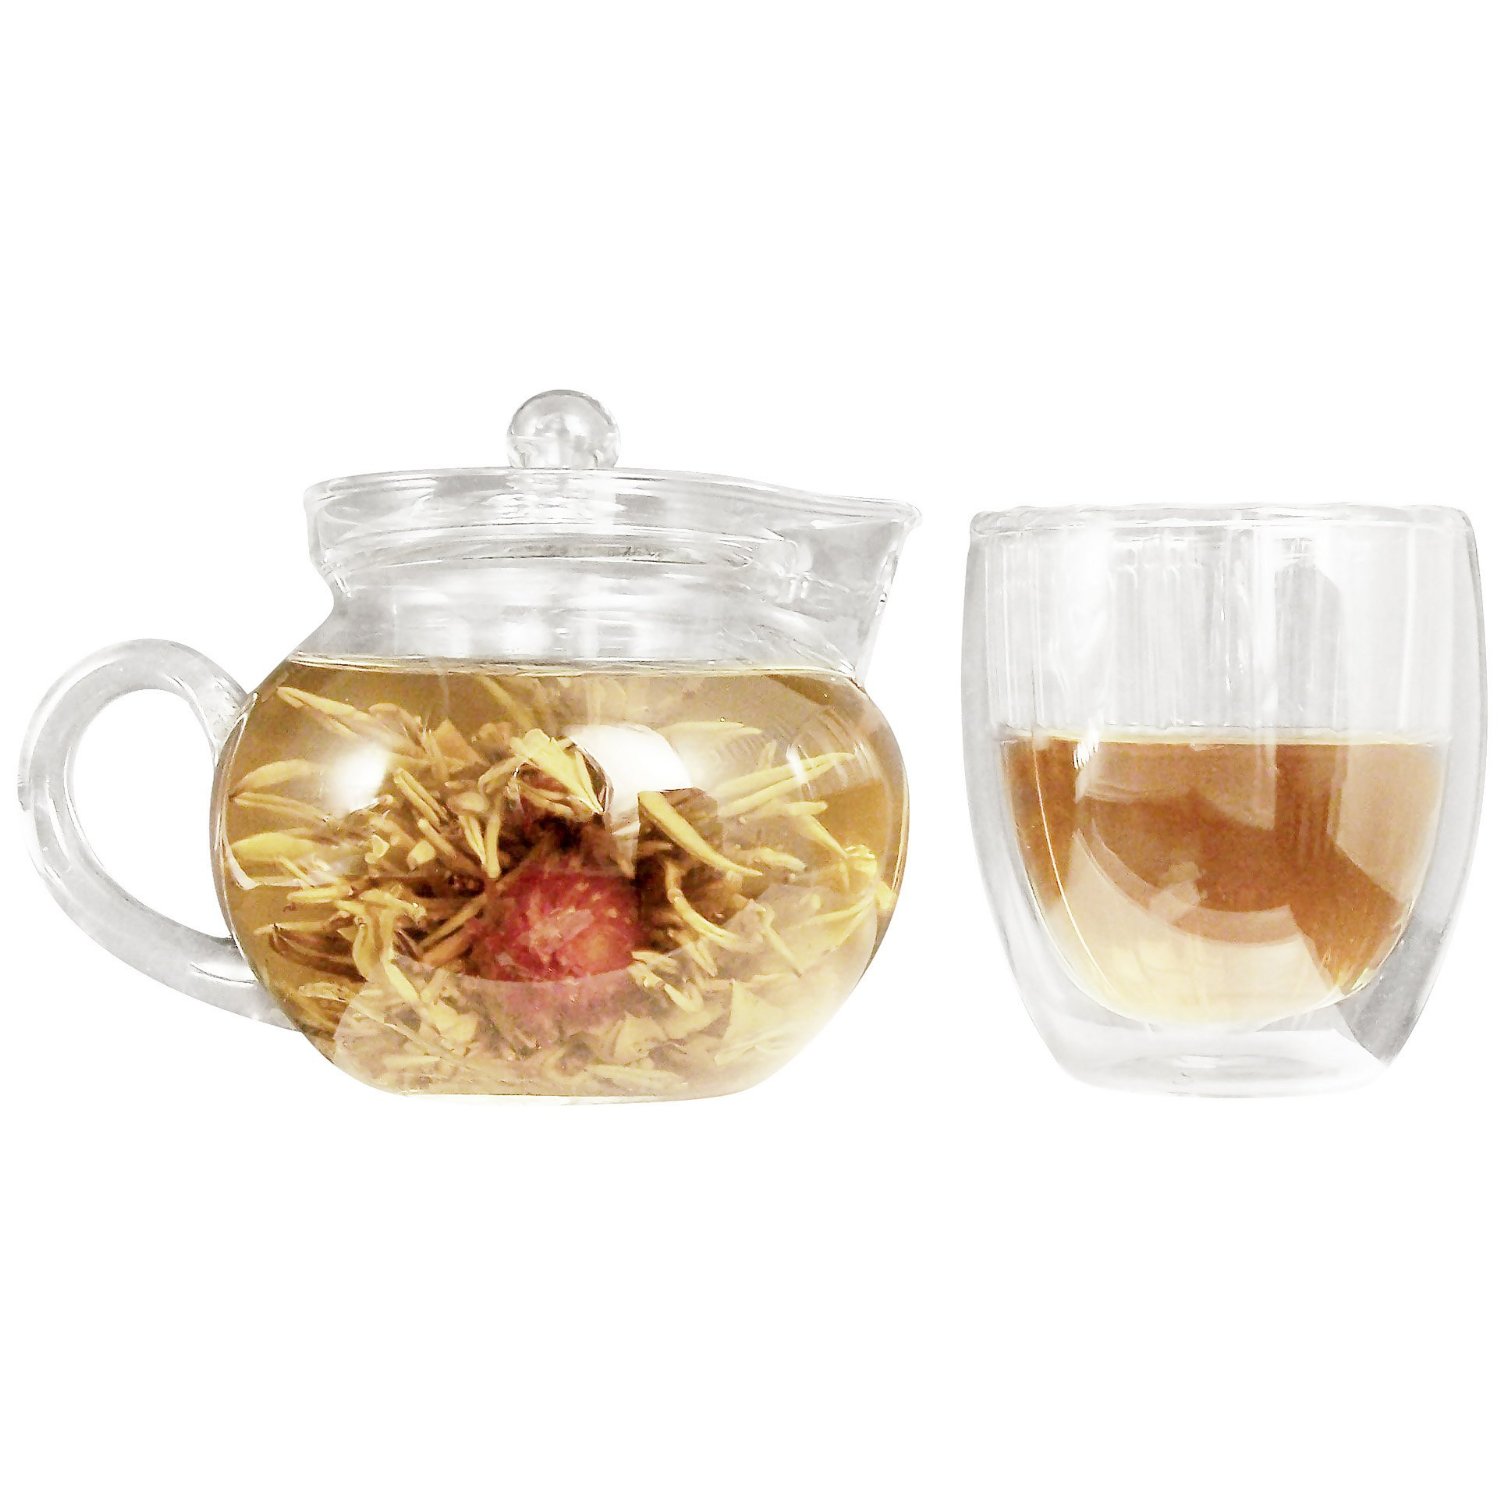 Northwest Glass Yama A20-SC 12-Ounce Teapot with 6-Ounce Doublewall Cup and 3-Blooming Teas, 1-Unit